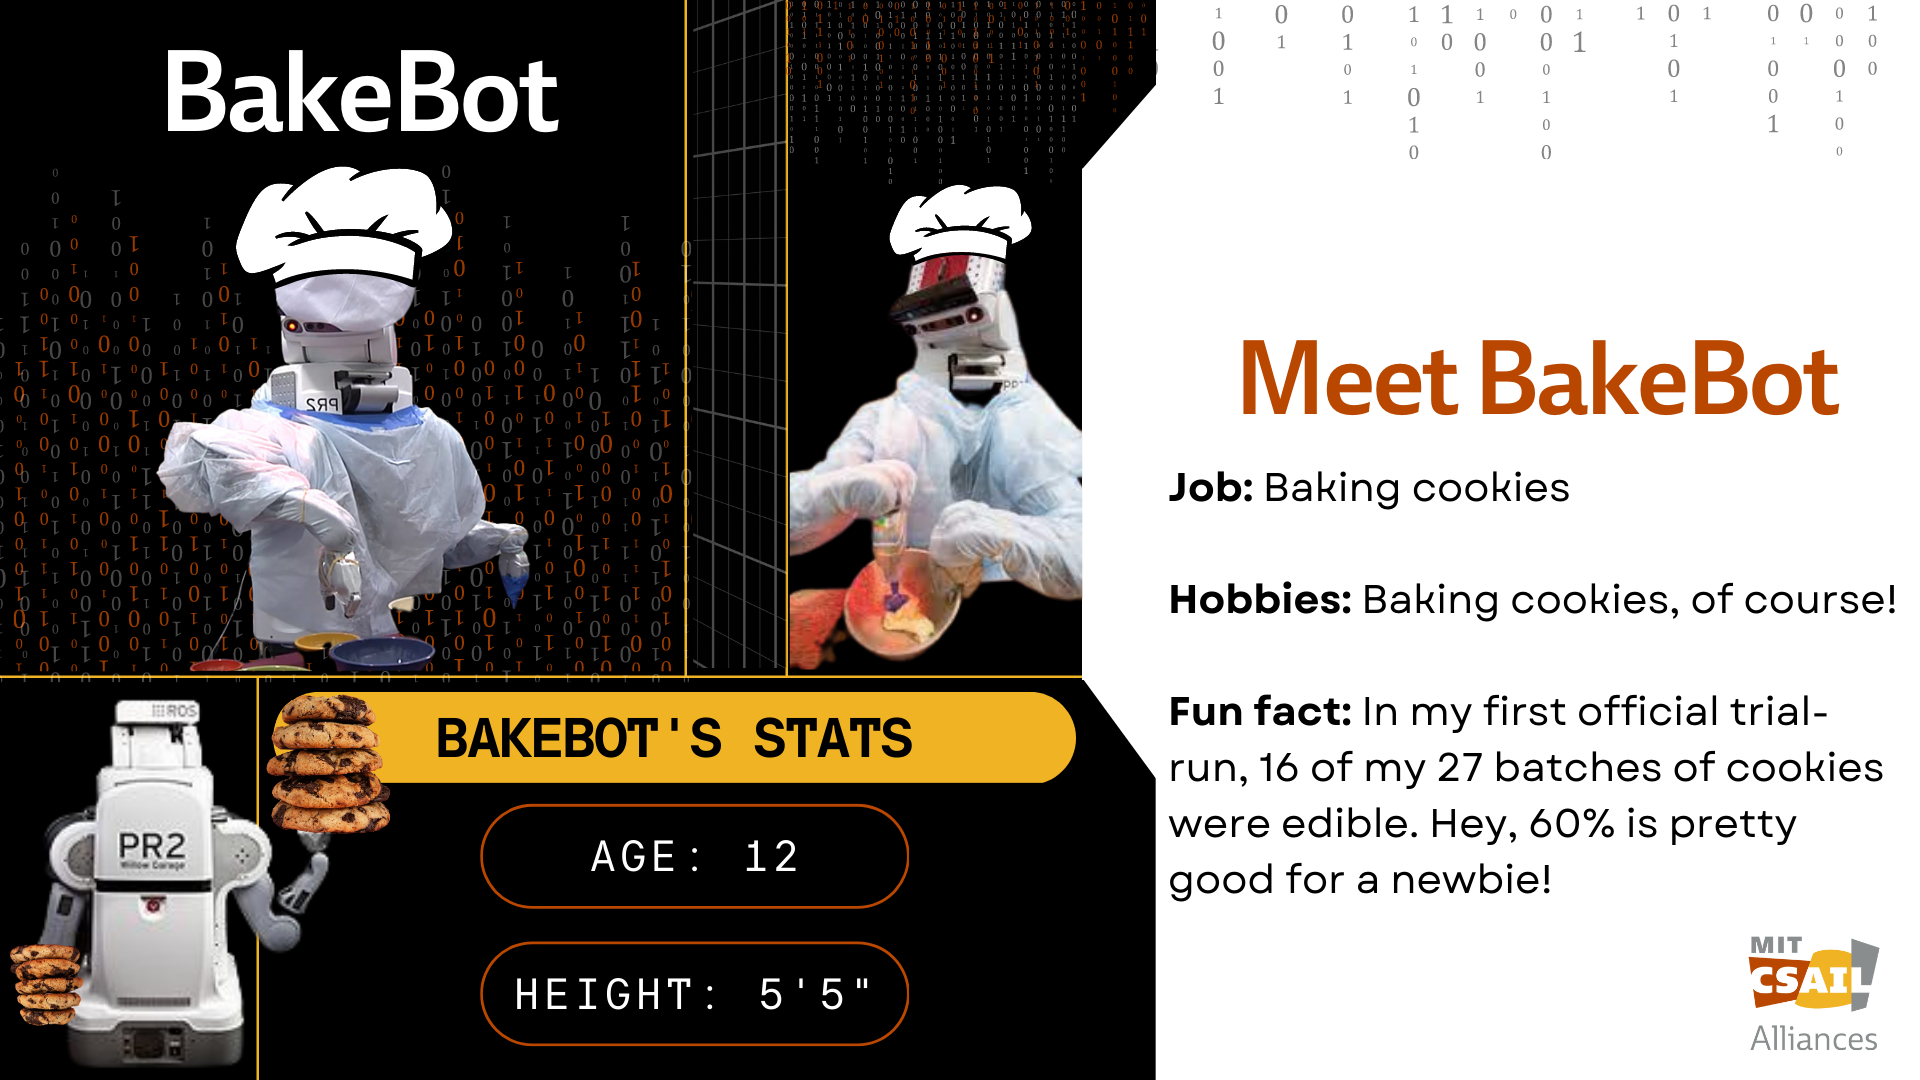 Bakebot robot photos with text that reads "Bakebot"